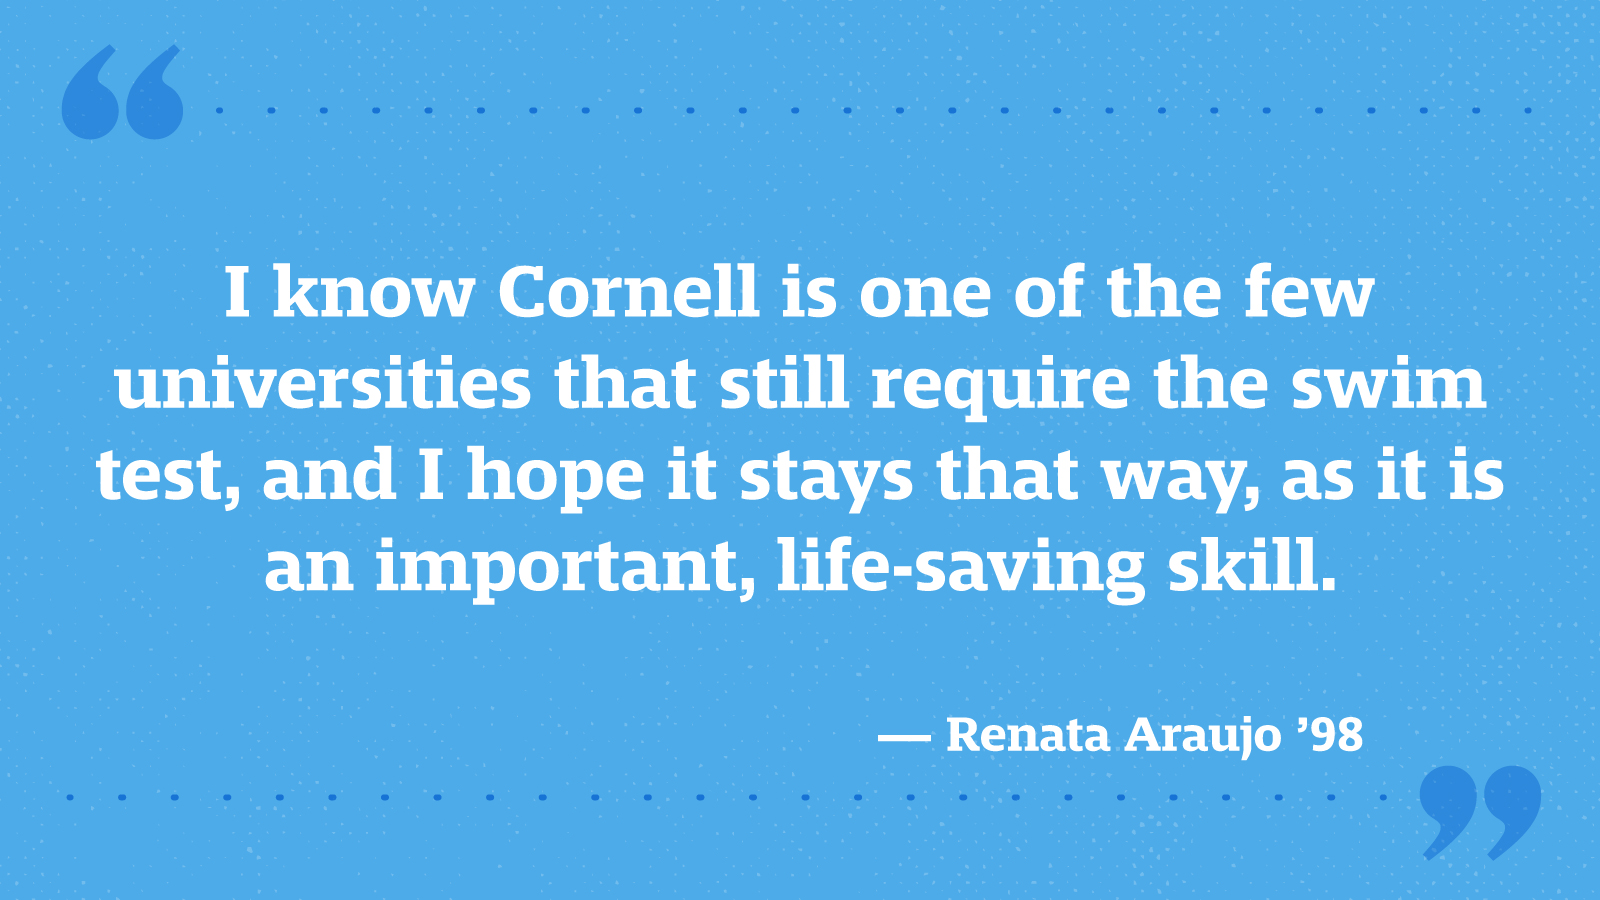 I know Cornell is one of the few universities that still require the swim test, and I hope it stays that way, as it is an important, life-saving skill. — Renata Araujo ’98